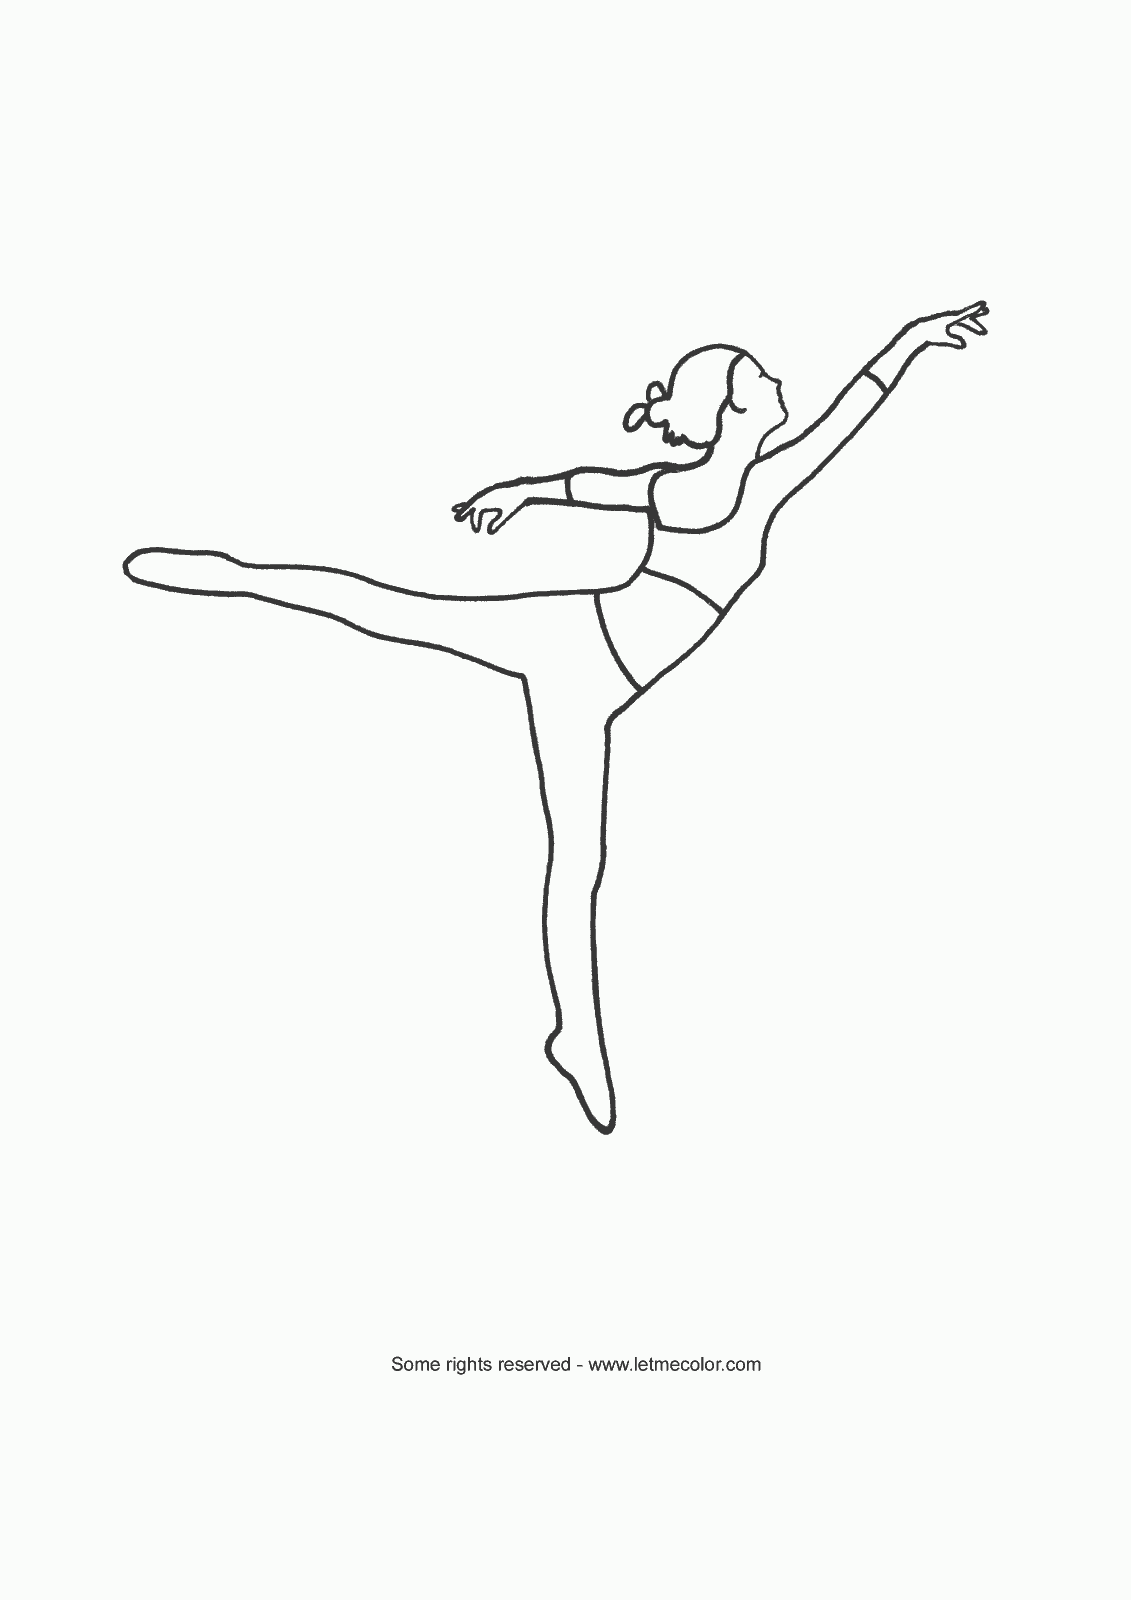 Free Ballerina Coloring Pages: 30 Coloring Sheets - VoteForVerde.com